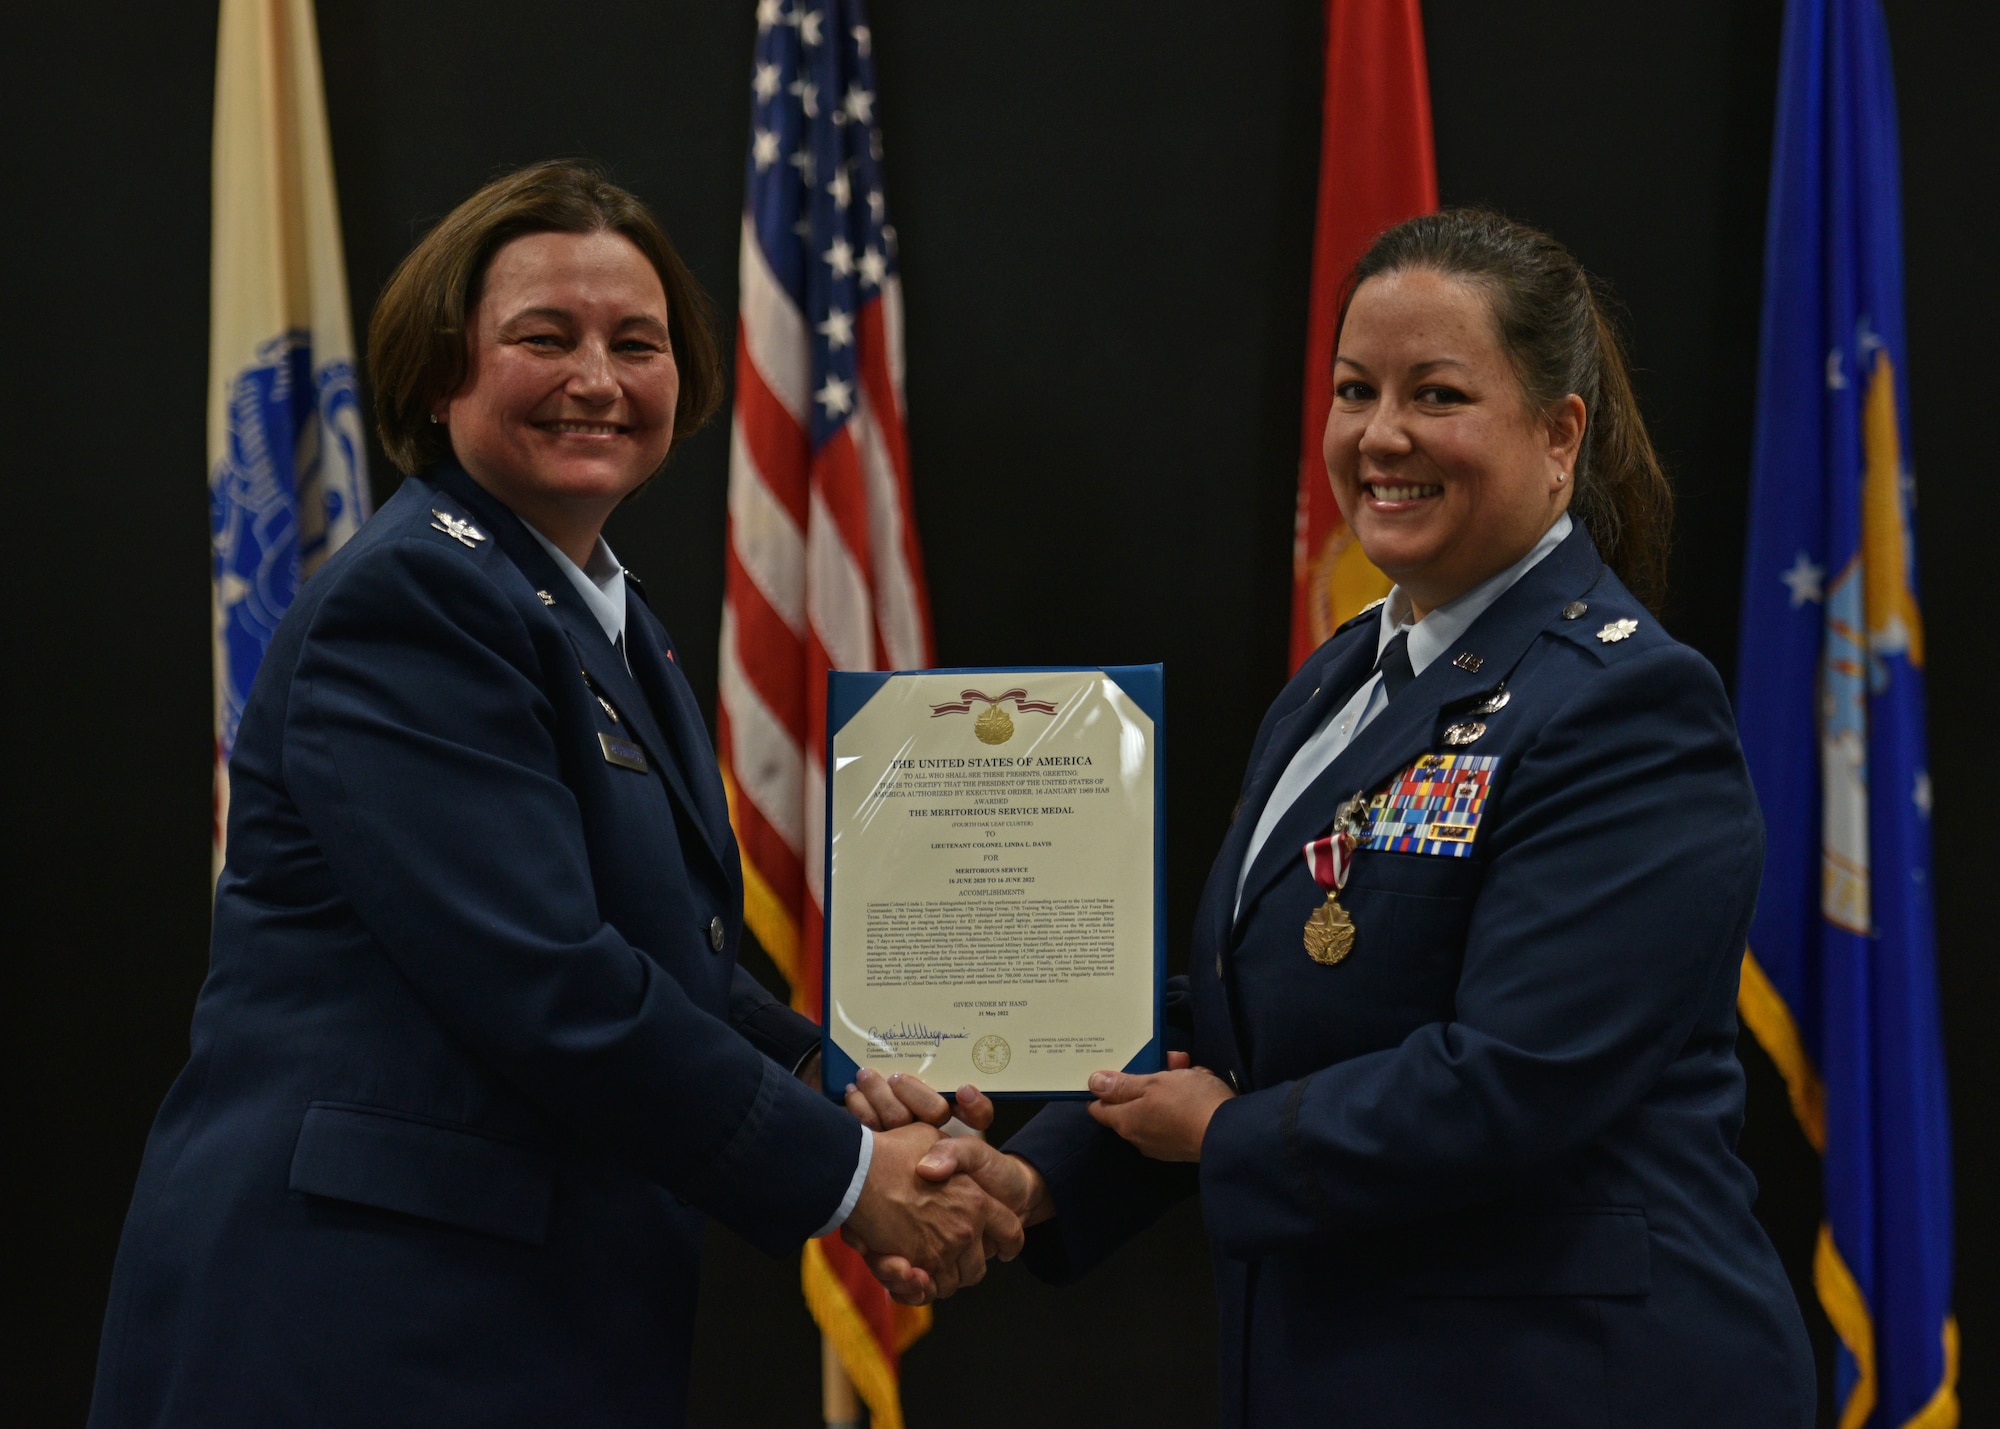 U.S. Air Force Col. Angelina Maguinness, 17th Training Group commander, presents a decoration to Lt. Col. Linda Davis, outgoing 17th Training Support Squadron commander, during the 17th TRSS change of command at the Powell Event Center, Goodfellow Air Force Base, Texas, June 17, 2022. Davis was highlighted for her outstanding leadership of the 17th TRSS during her two years in command. (U.S. Air Force photo by Senior Airman Ashley Thrash)